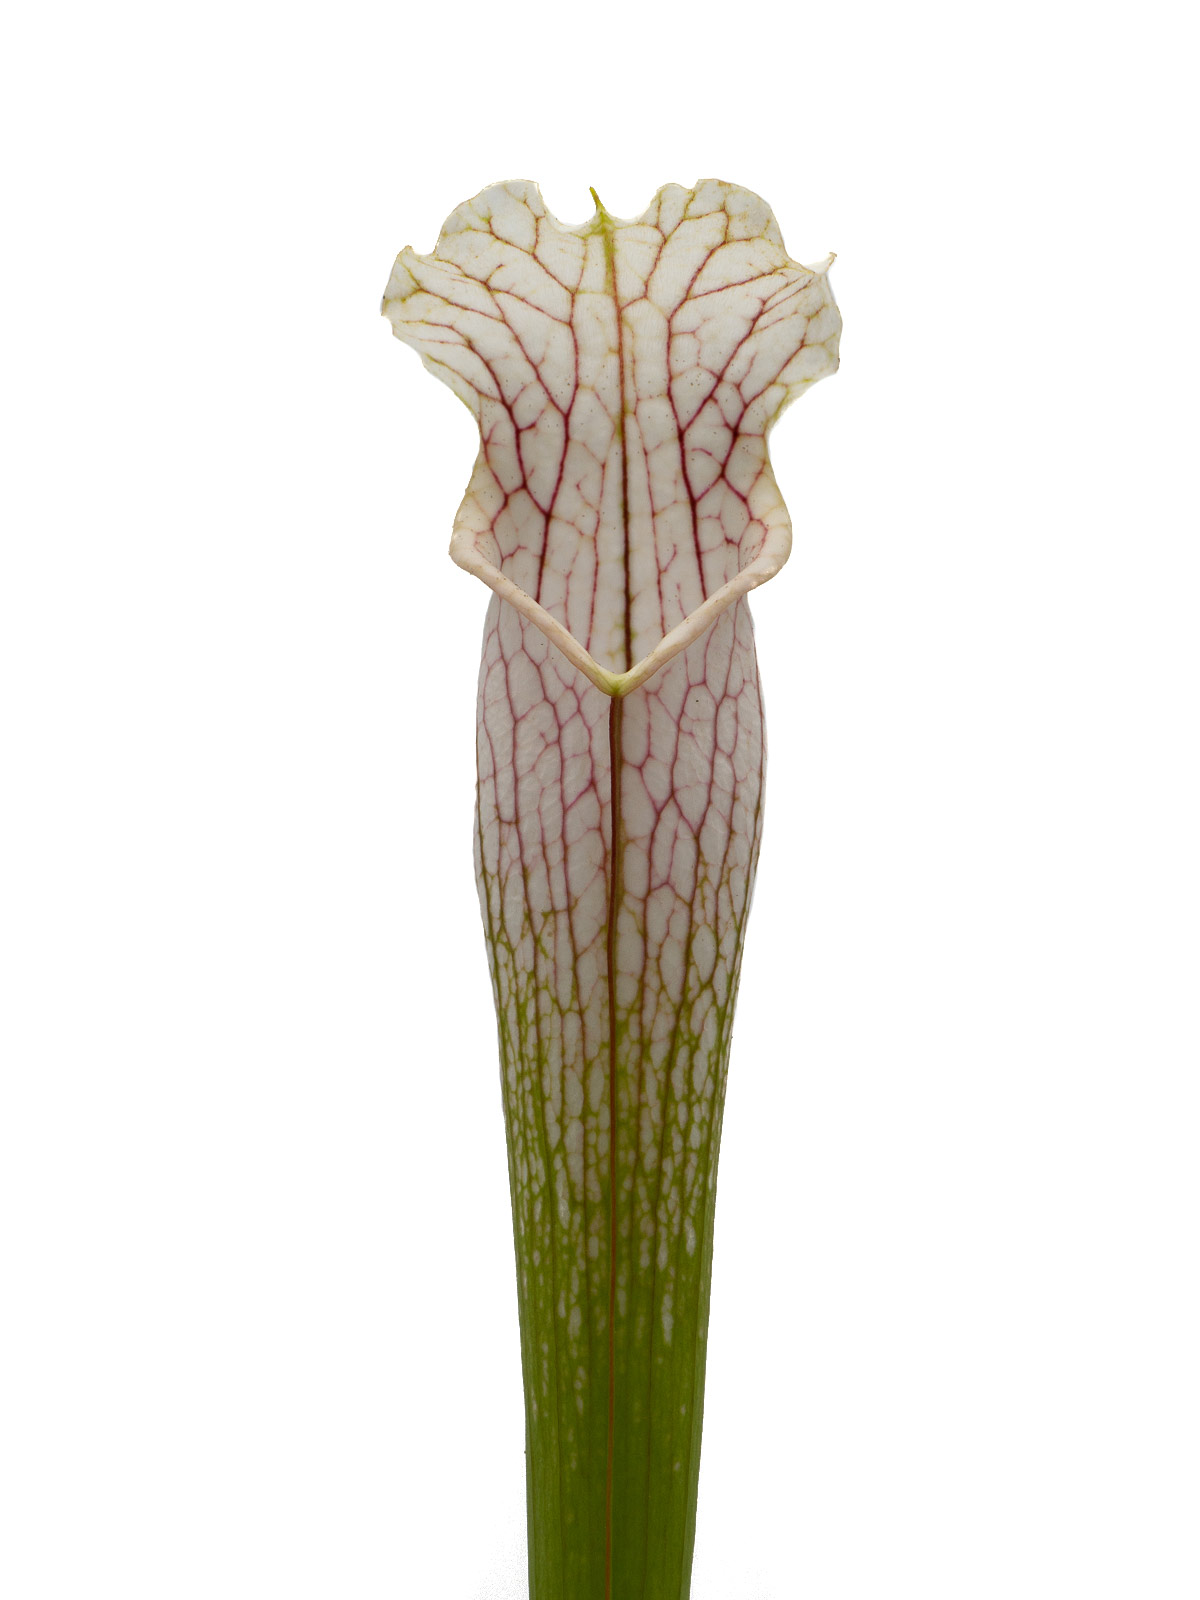 Sarracenia leucophylla - MK L14, yellow flower, Russell Road, Citronelle, Mobile County, Alabama